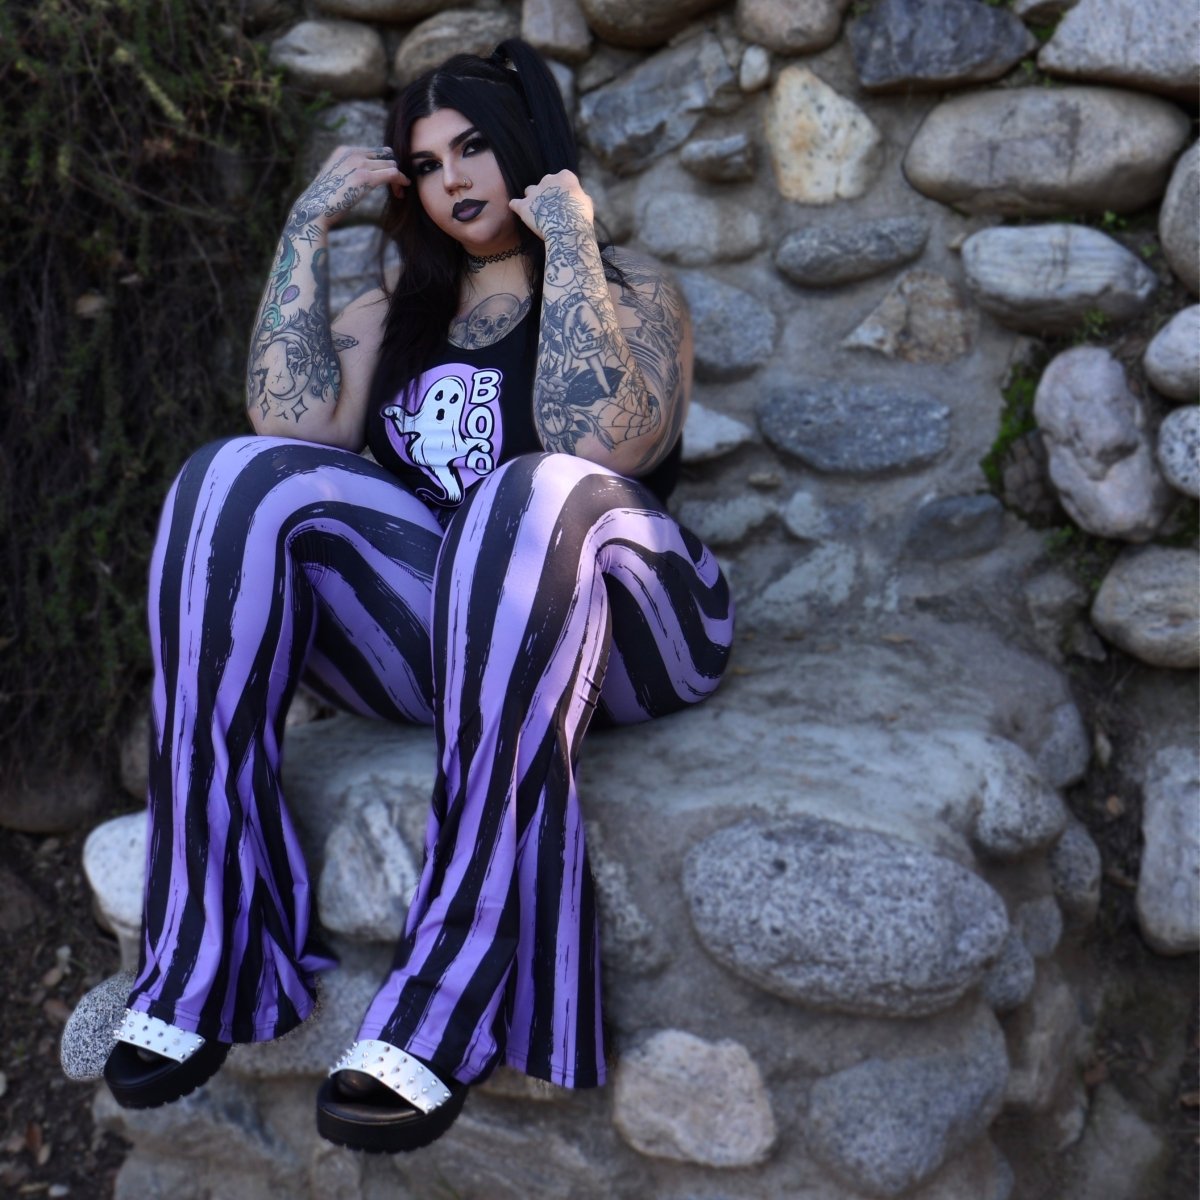 Too Fast | Distressed Black and Purple Striped Flare Pant Hellz Bellz